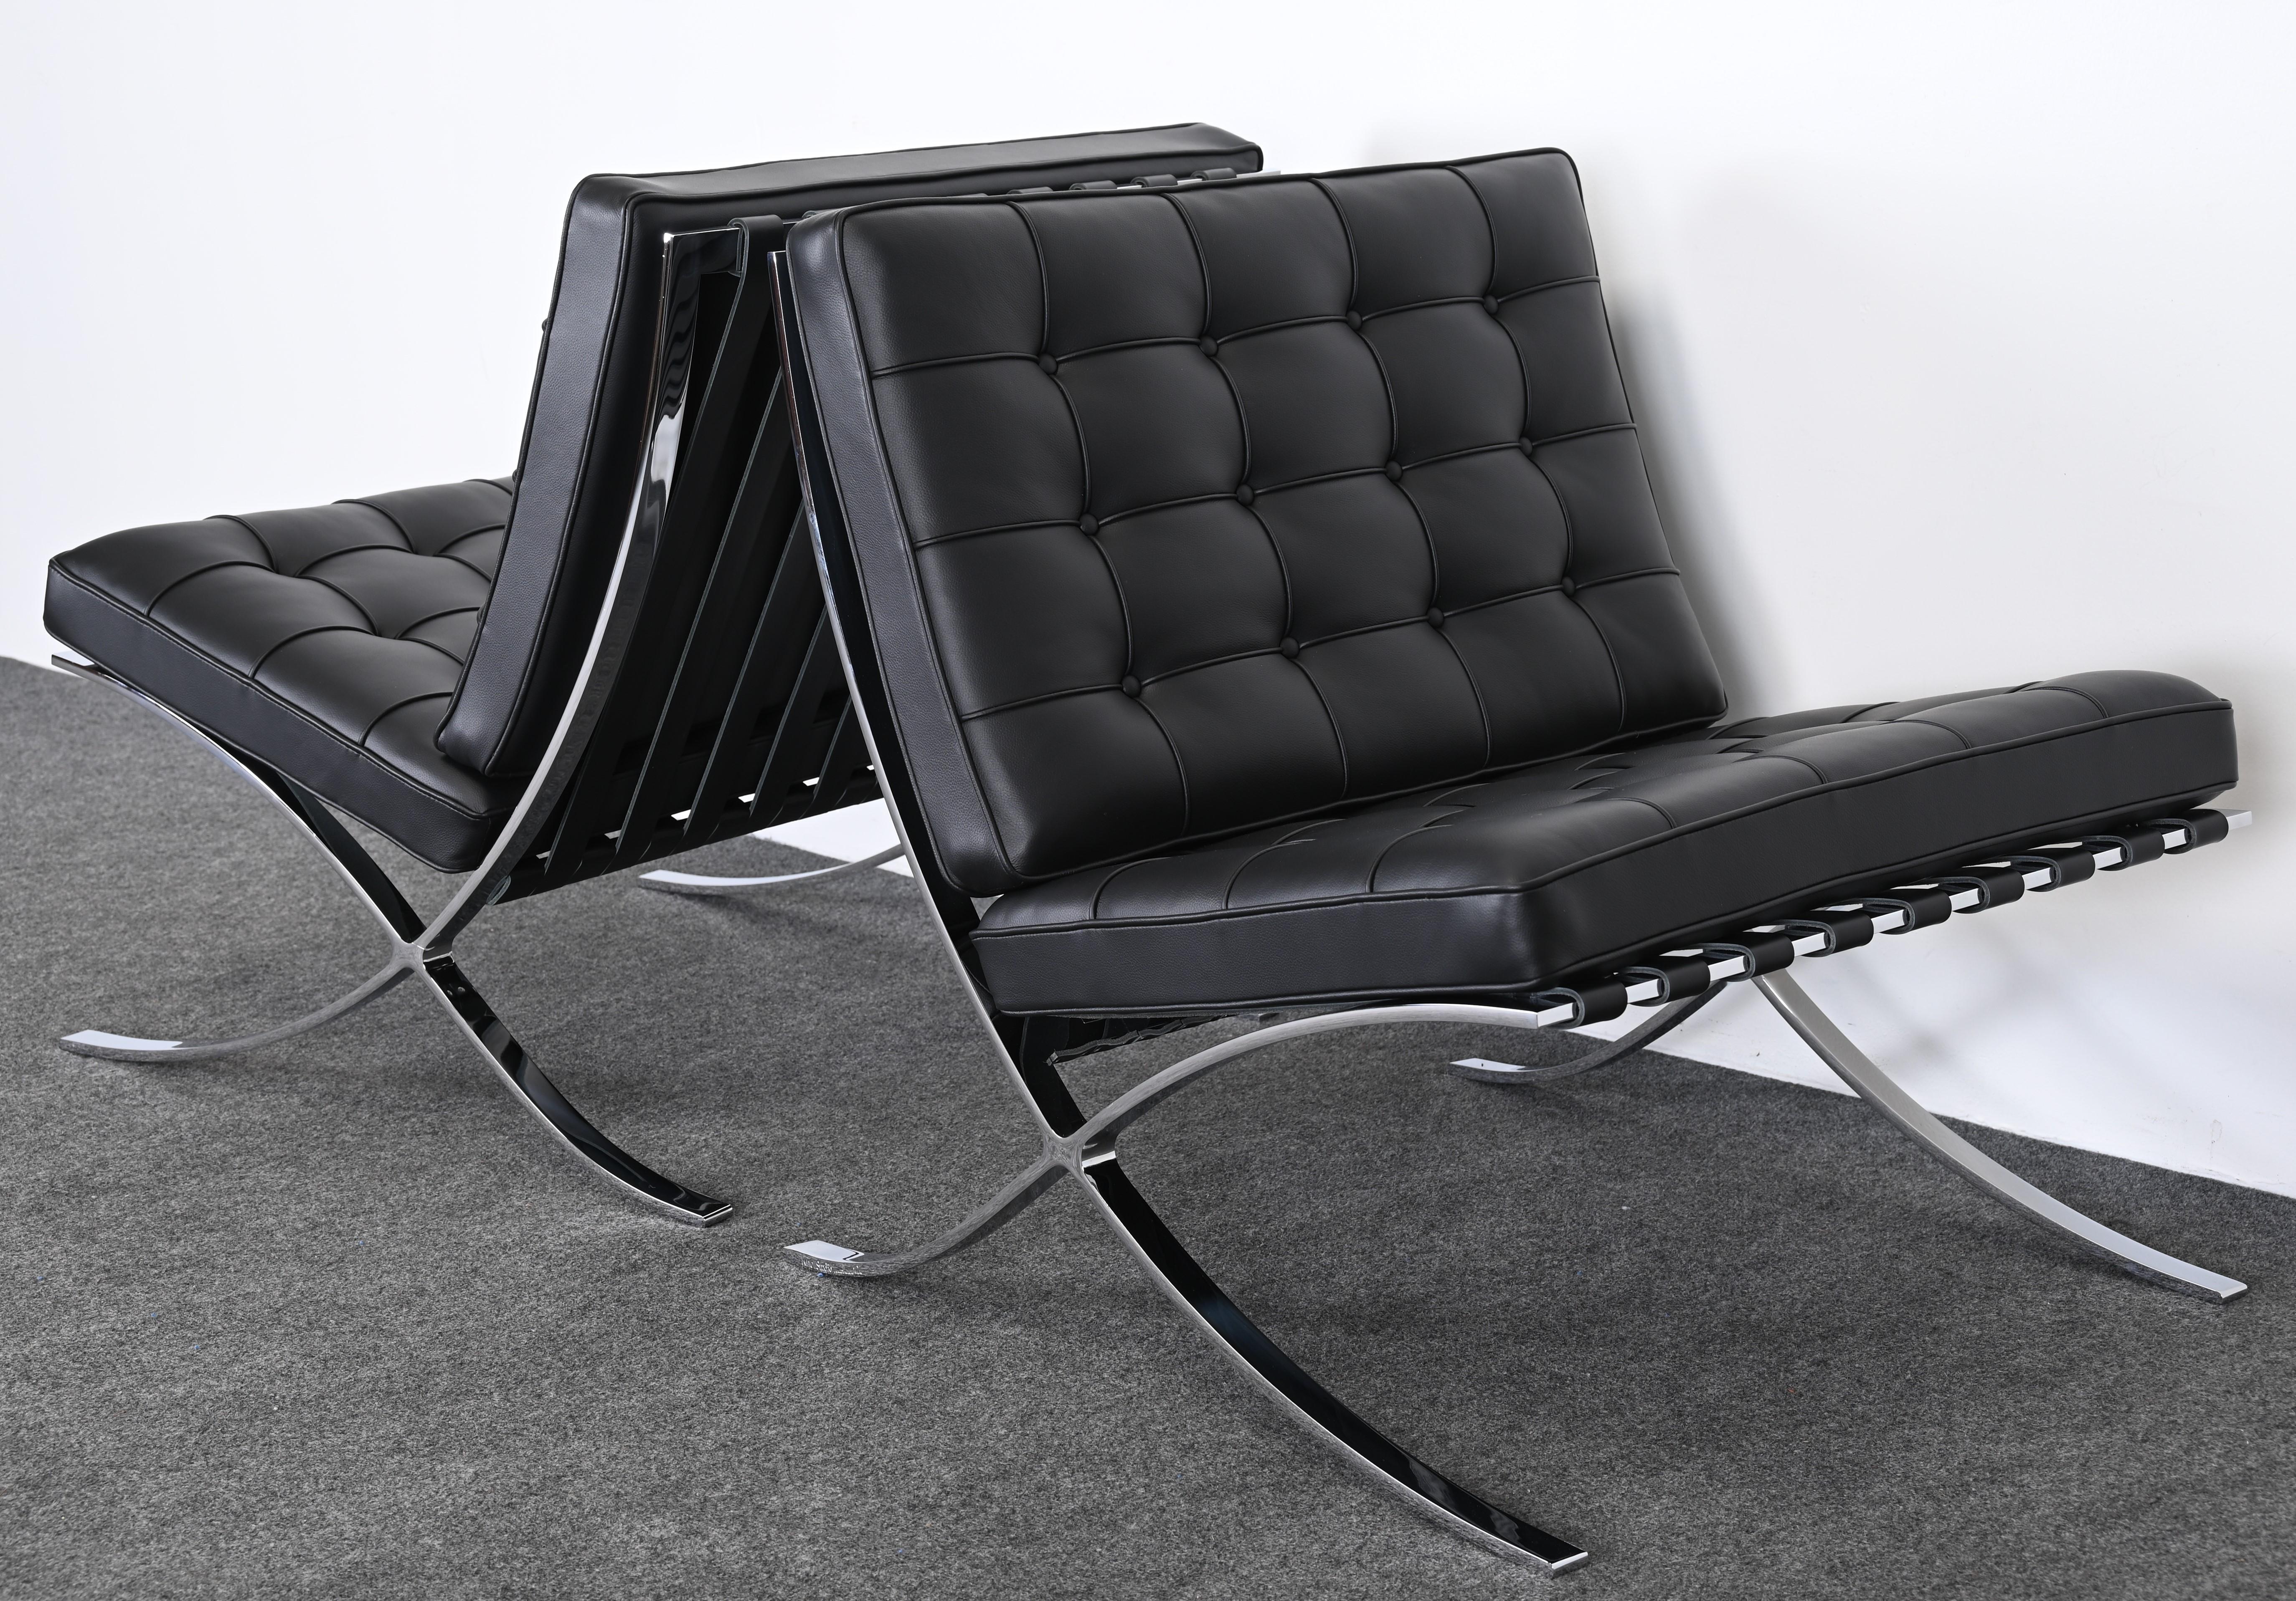 Steel Pair of Ludwig Mies van der Rohe Barcelona Chairs for Knoll Studio